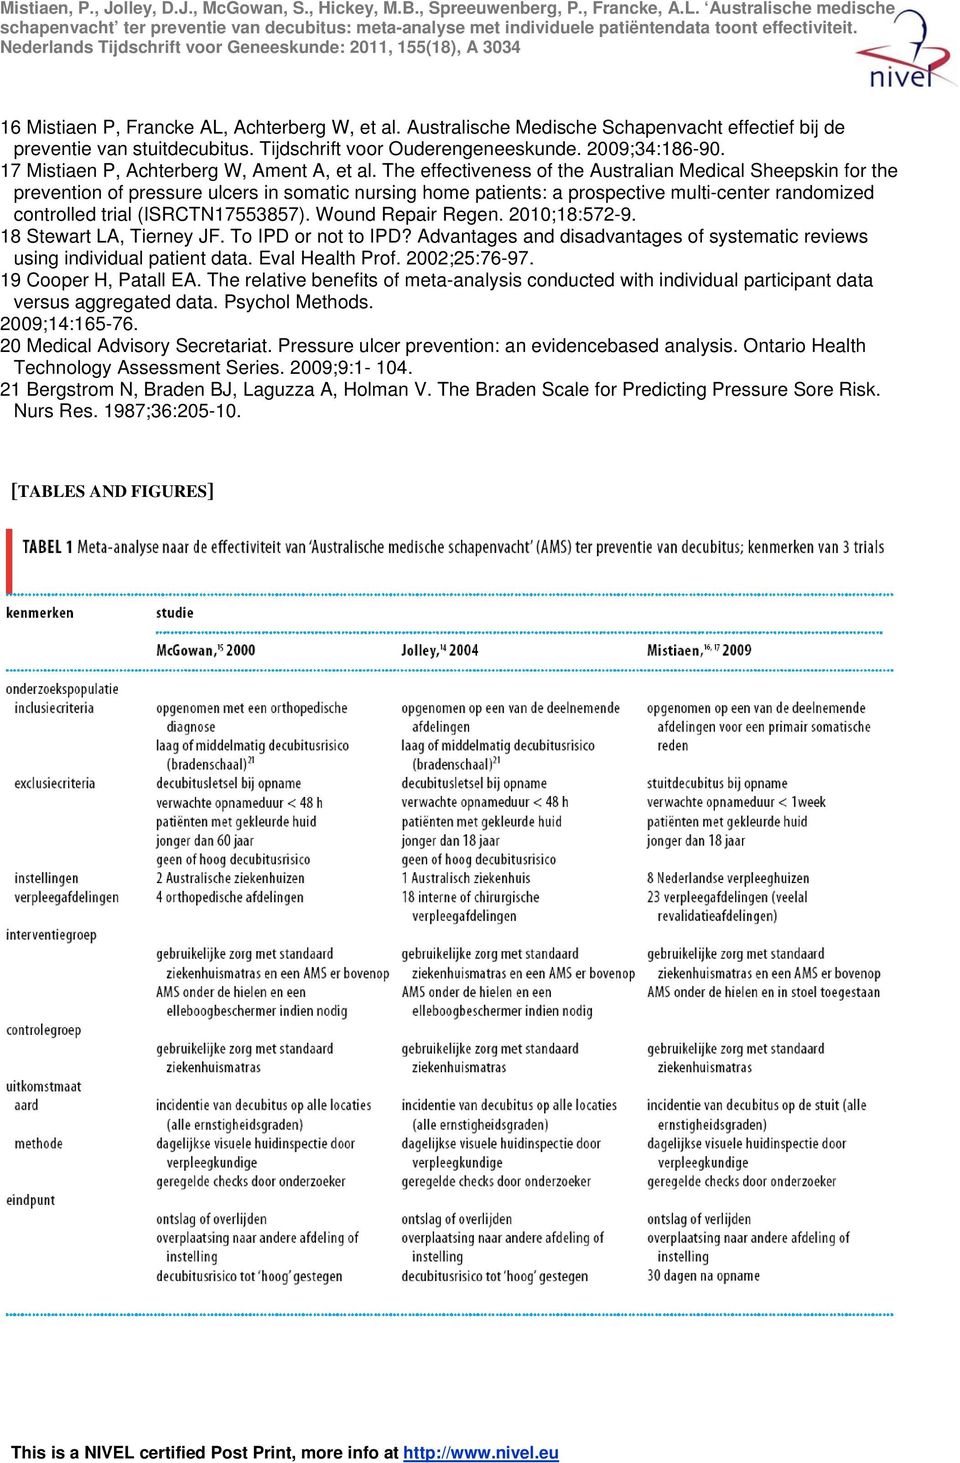 The effectiveness of the Australian Medical Sheepskin for the prevention of pressure ulcers in somatic nursing home patients: a prospective multi-center randomized controlled trial (ISRCTN17553857).